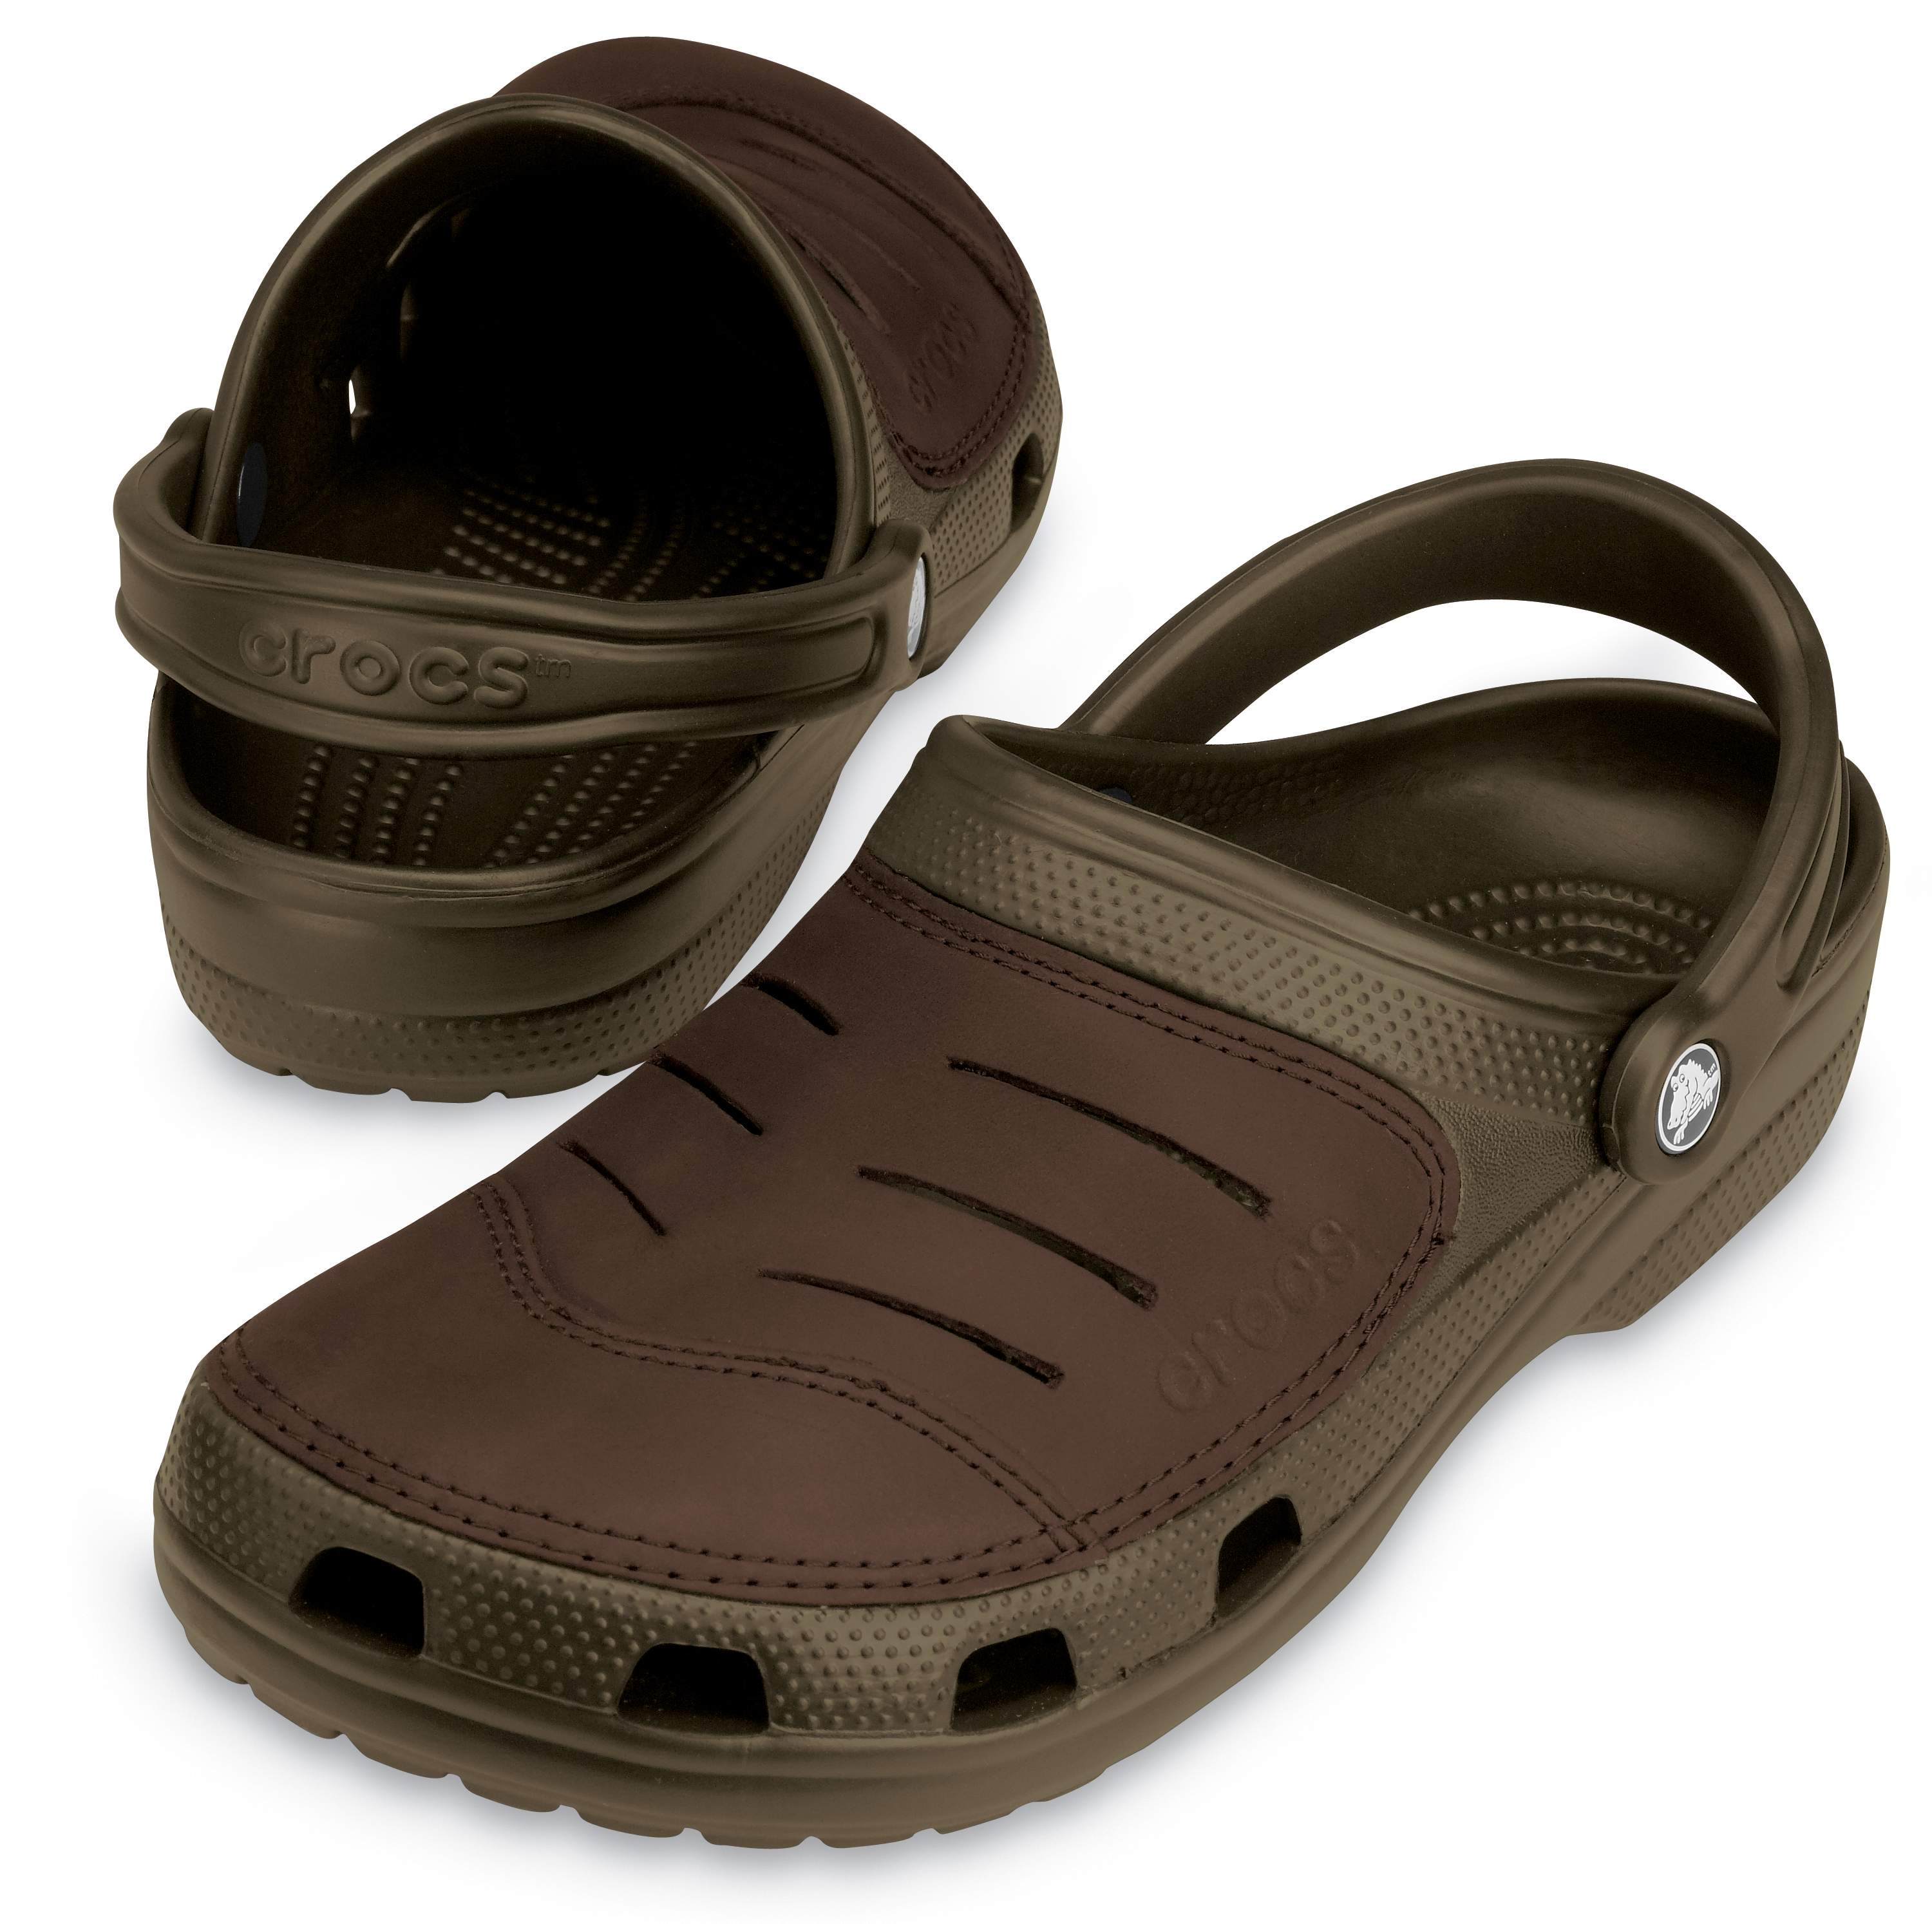 crocs with leather uppers